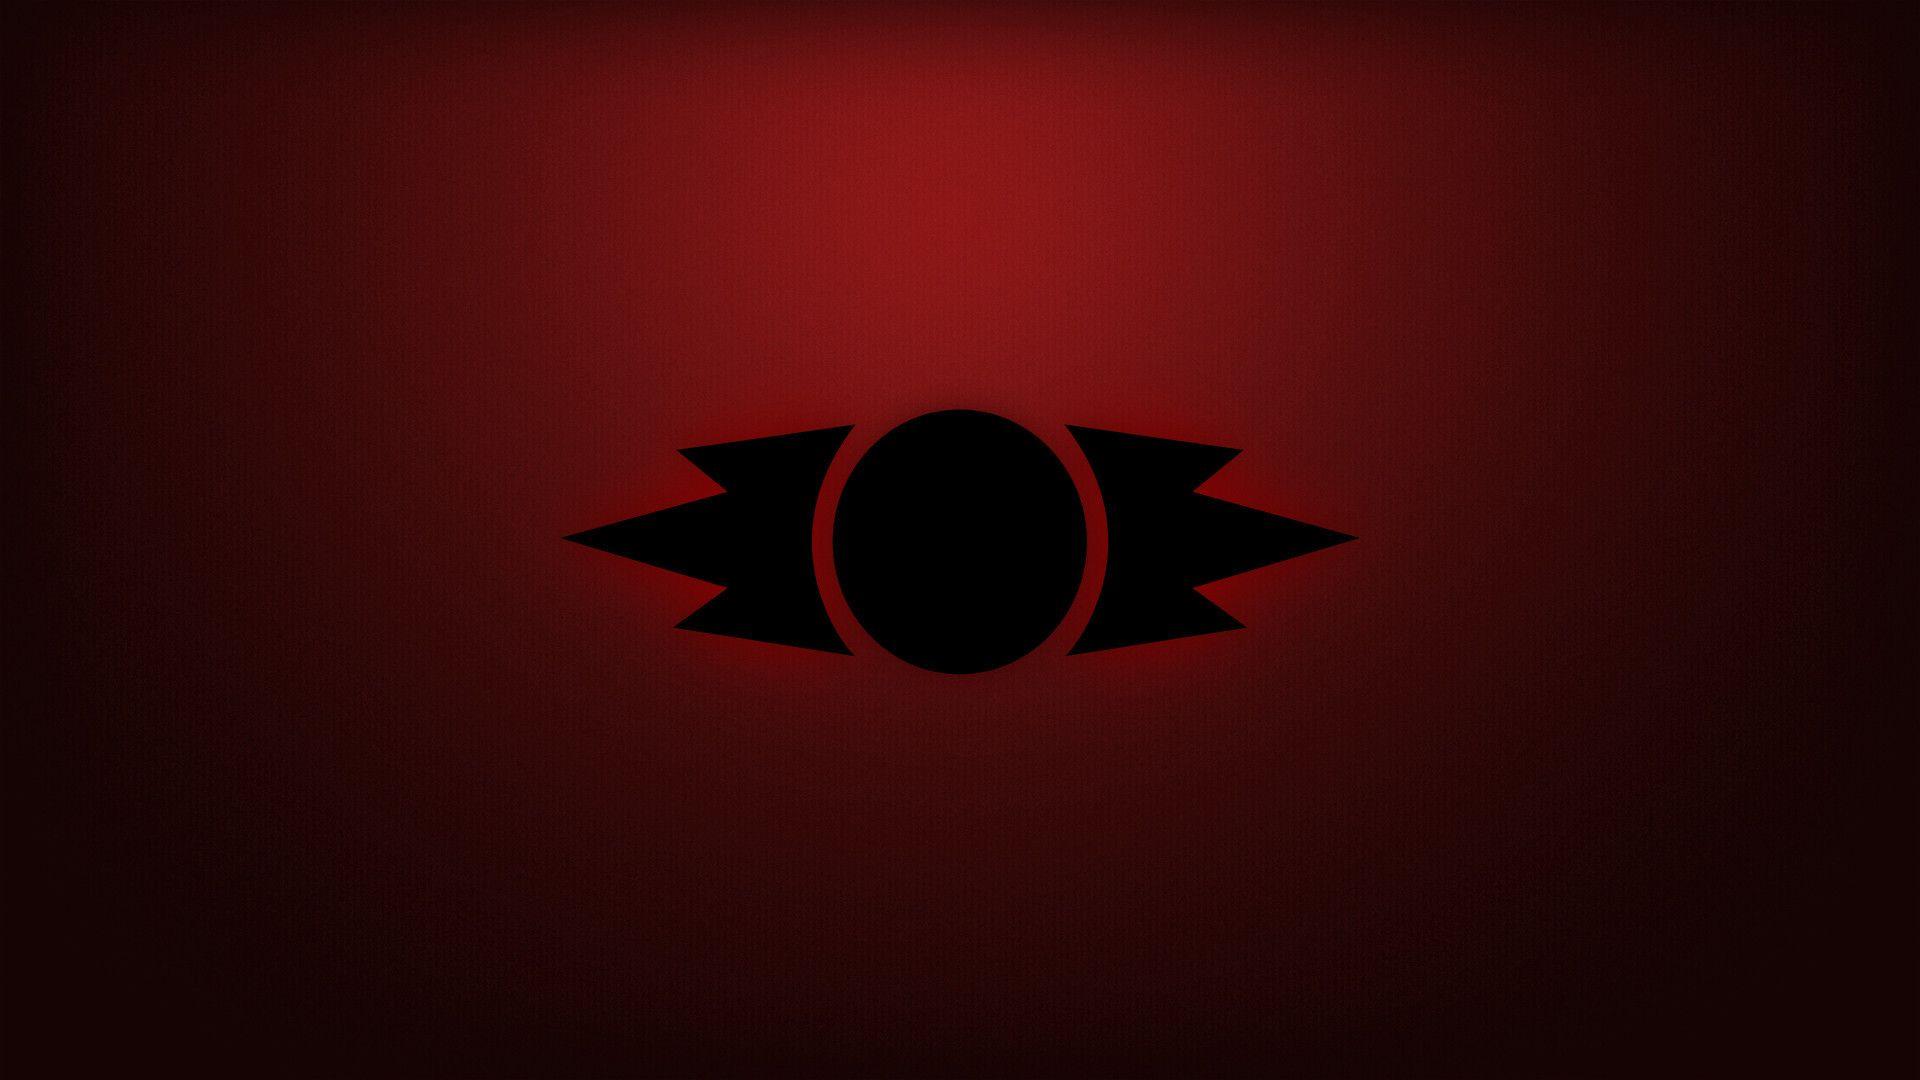 Sith Logo - 75+ Sith Symbol Wallpapers on WallpaperPlay